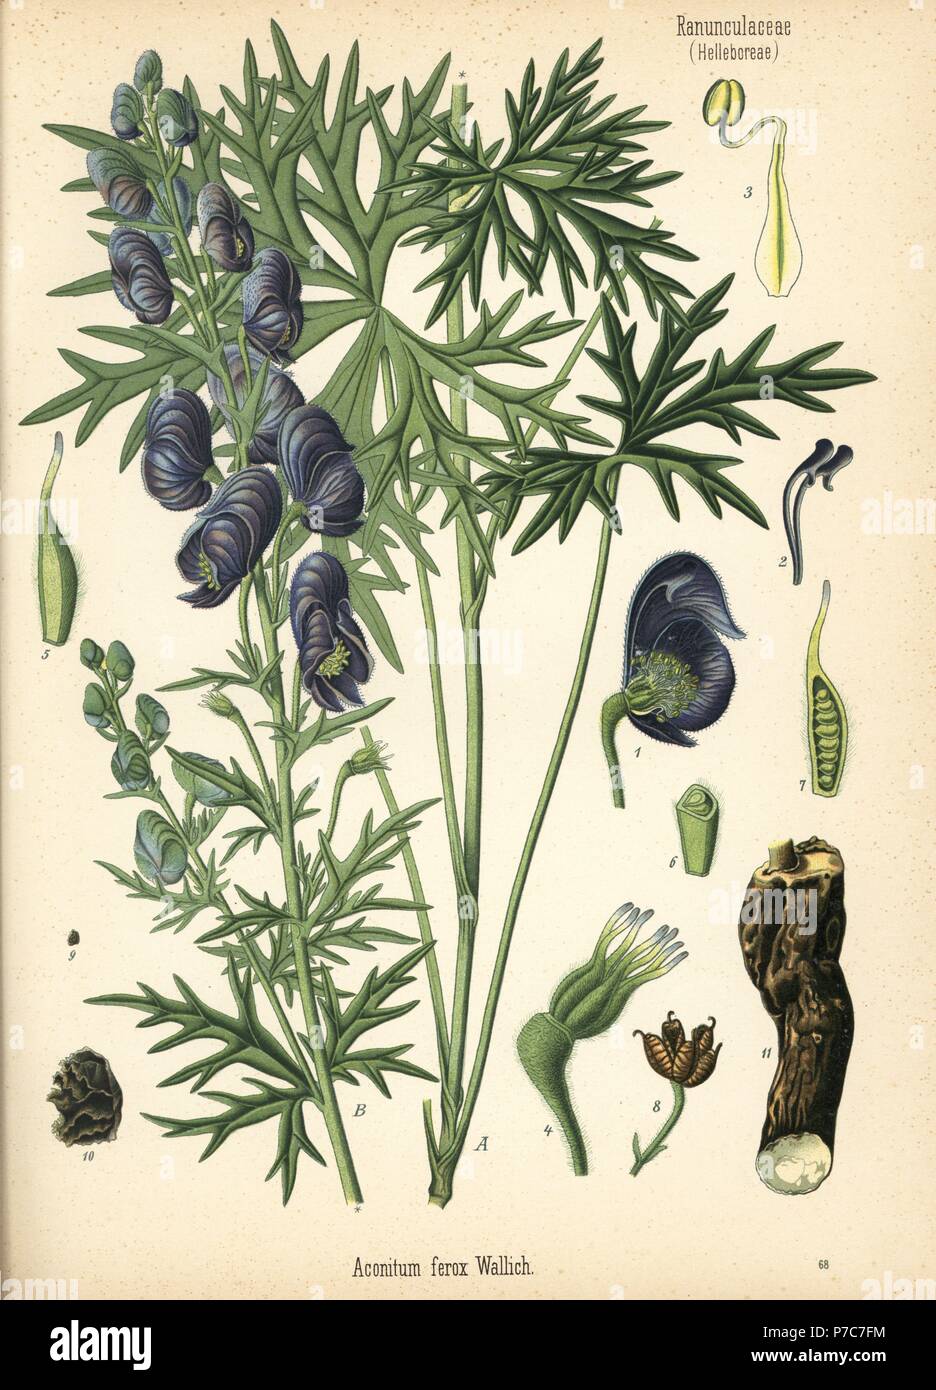 Monkshood or Indian aconite, Aconitum ferox. Chromolithograph after a botanical illustration from Hermann Adolph Koehler's Medicinal Plants, edited by Gustav Pabst, Koehler, Germany, 1887. Stock Photo